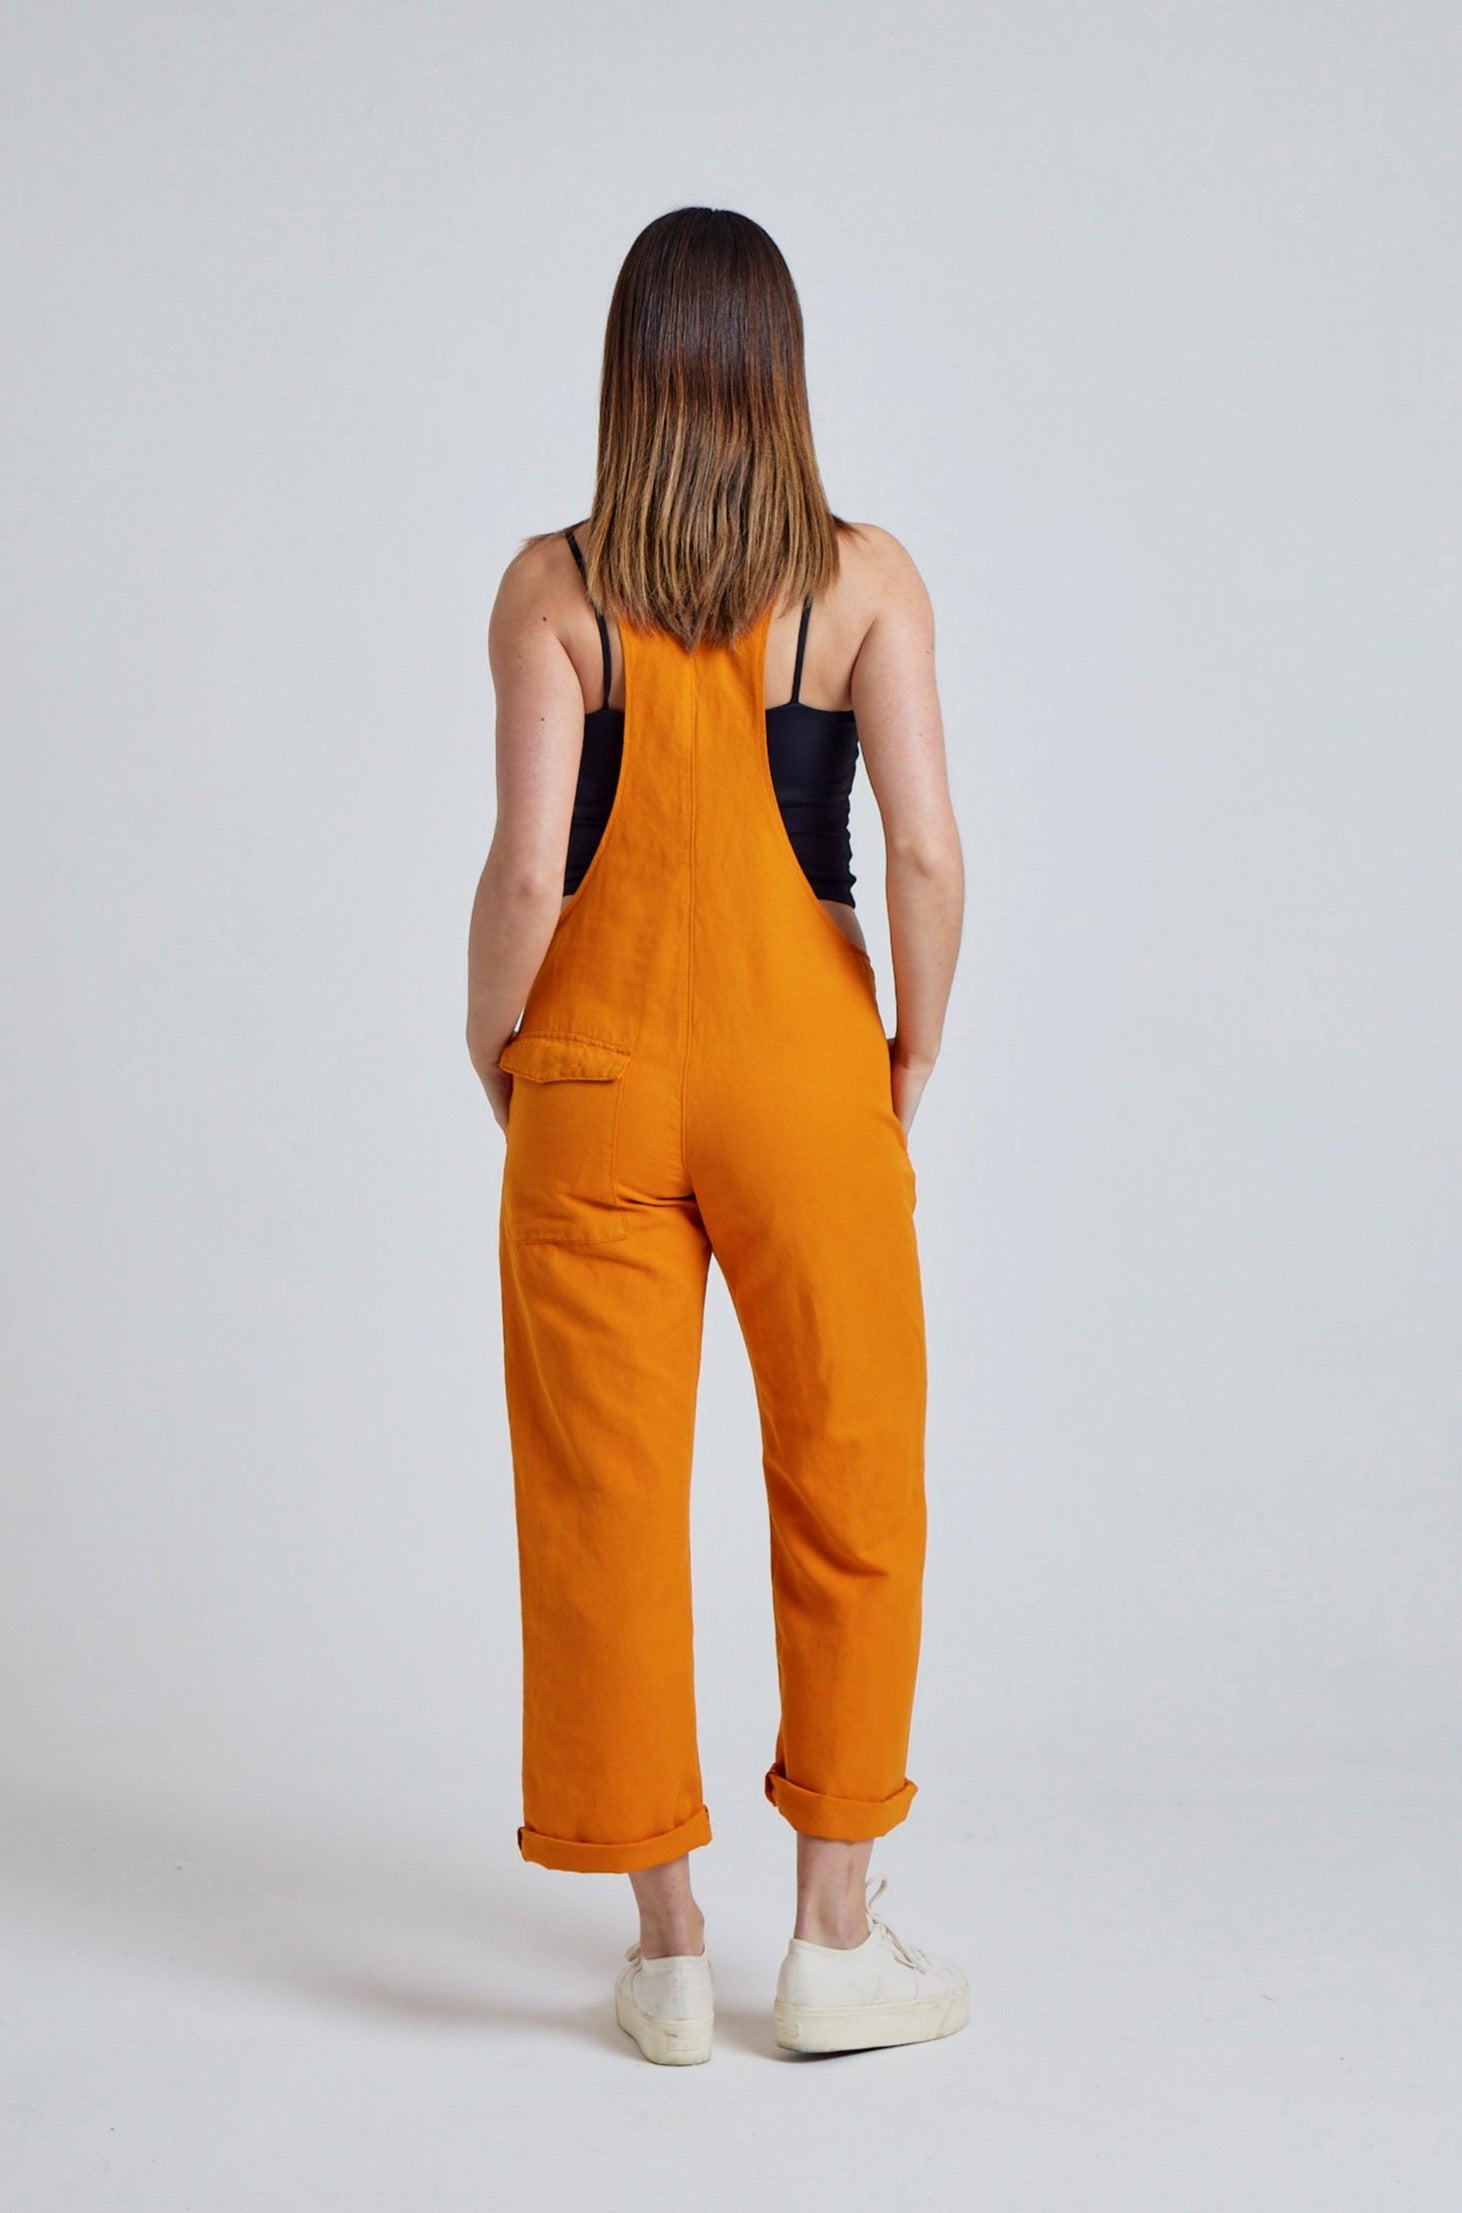 Sun Orange Mary-Lou Pocket Dungaree - GOTS Certified Organic Cotton and Linen